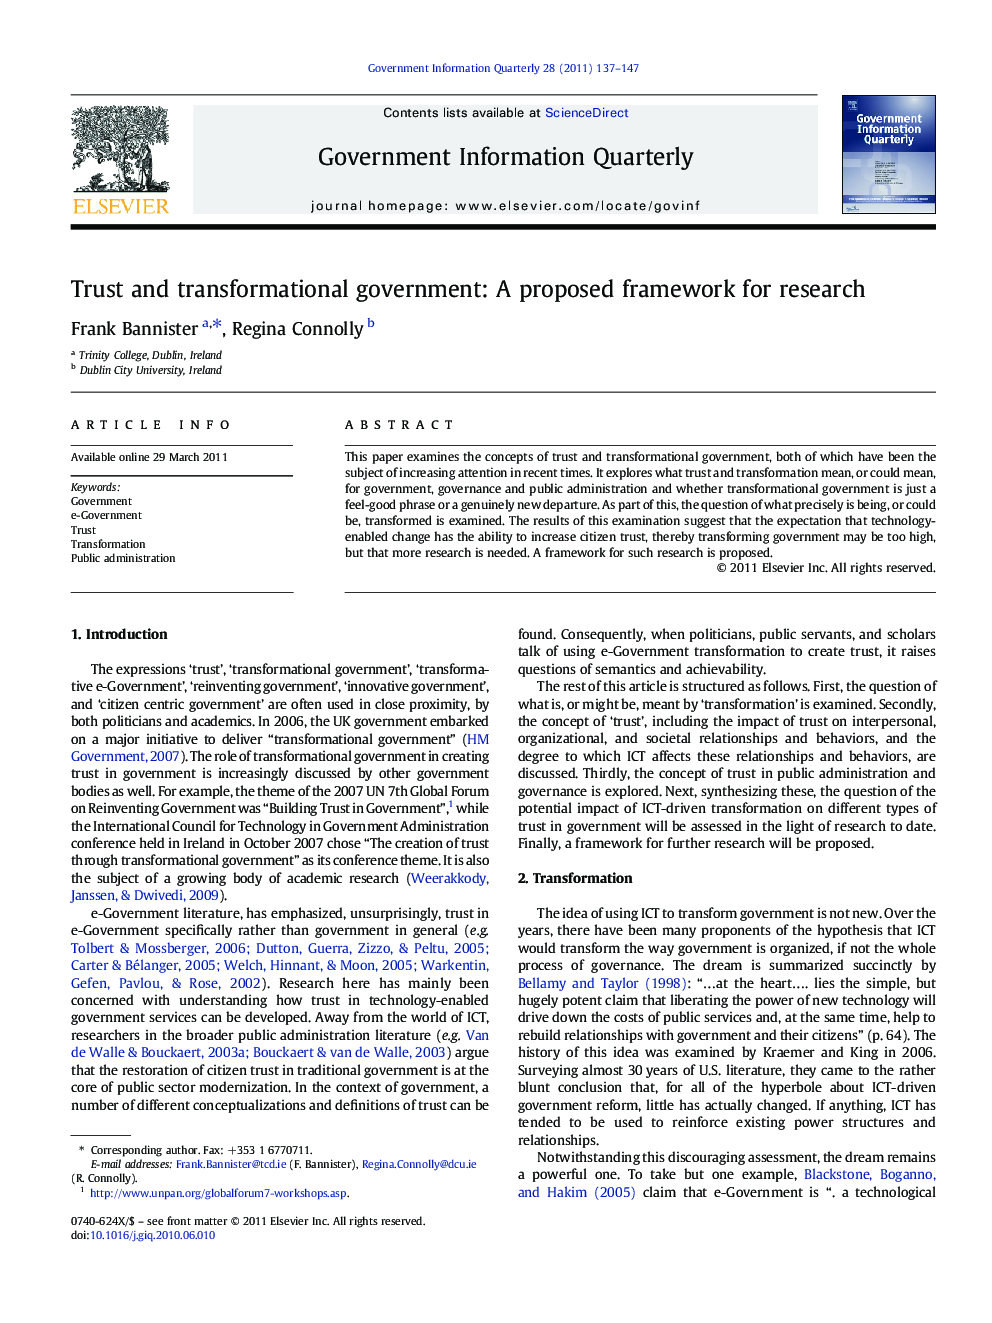 Trust and transformational government: A proposed framework for research